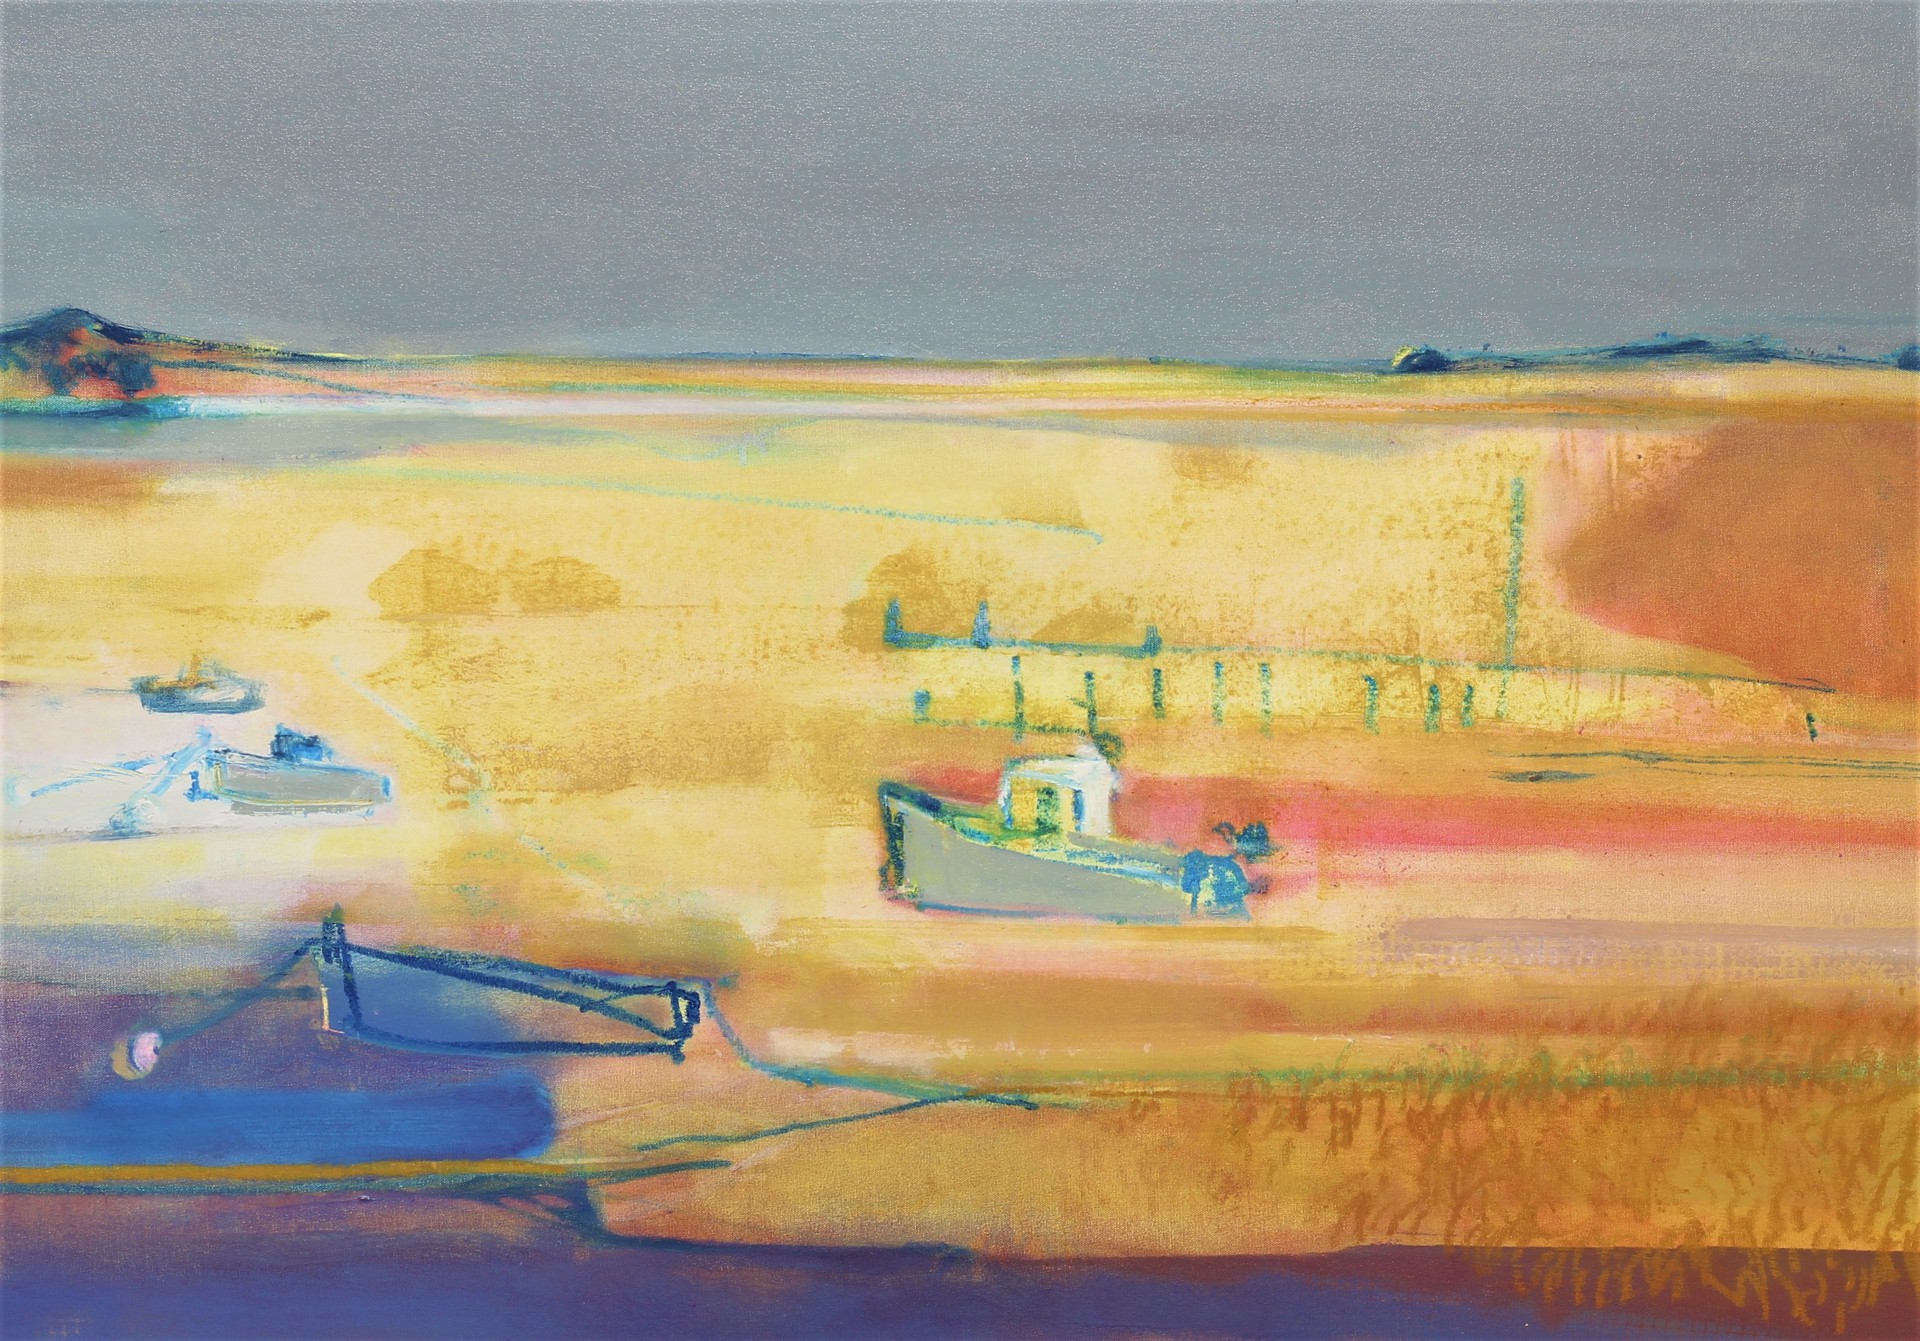 ONE BOAT CHUGGING OUT THE BAY  by CHRISTINA THWAITES (Landscape)